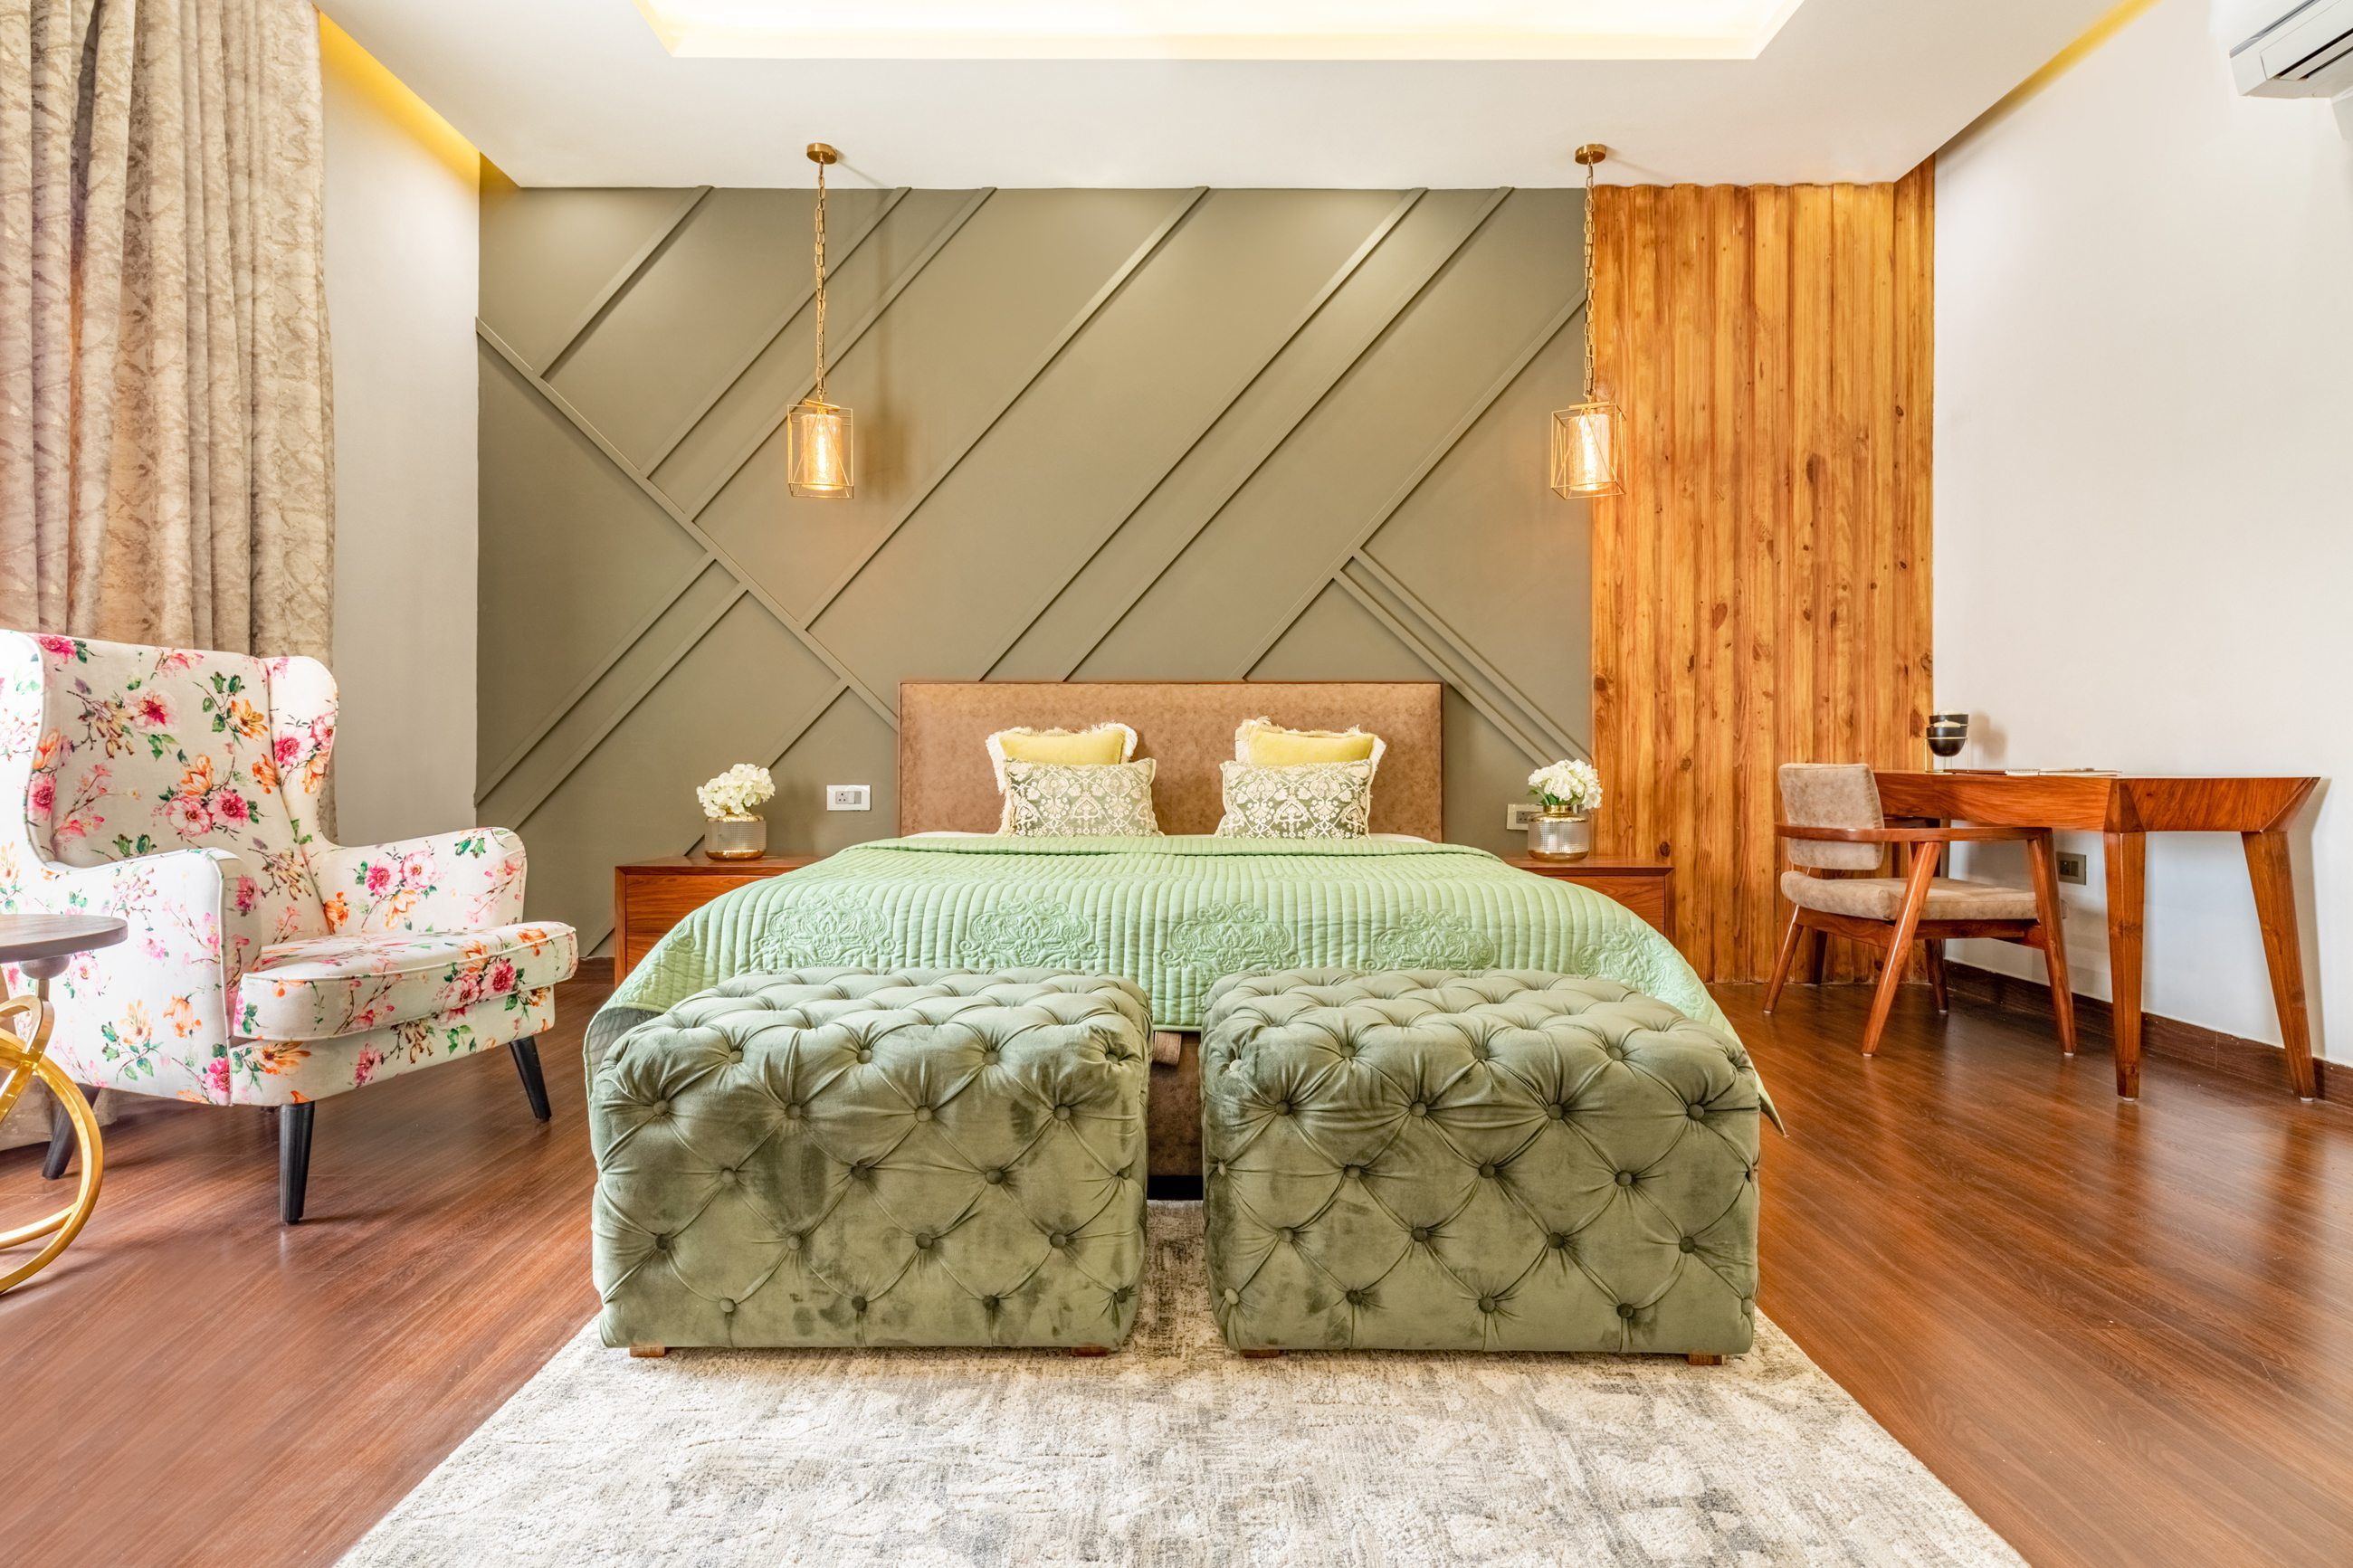 Modern Bedroom Wall Design With Light Green Paint